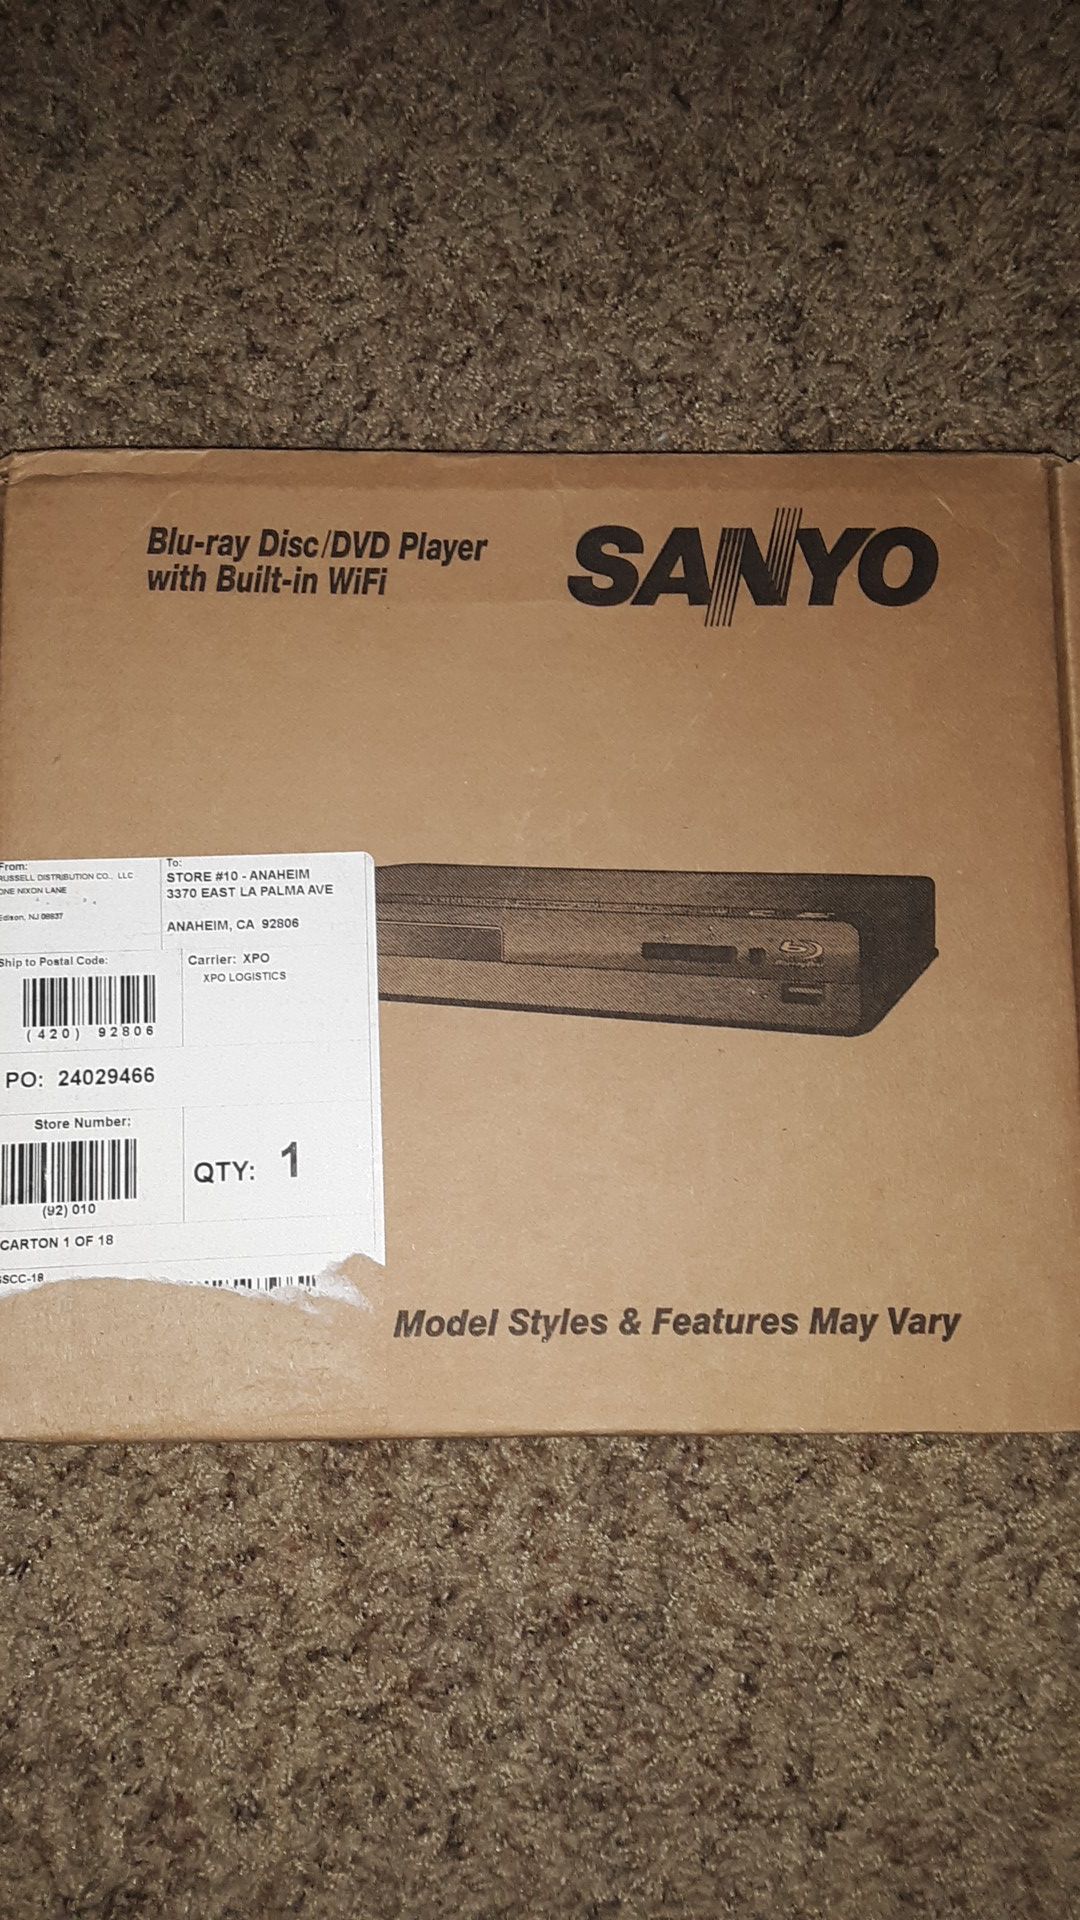 SANYO Blu-ray Disc/DVD Player with Built-in Wifi